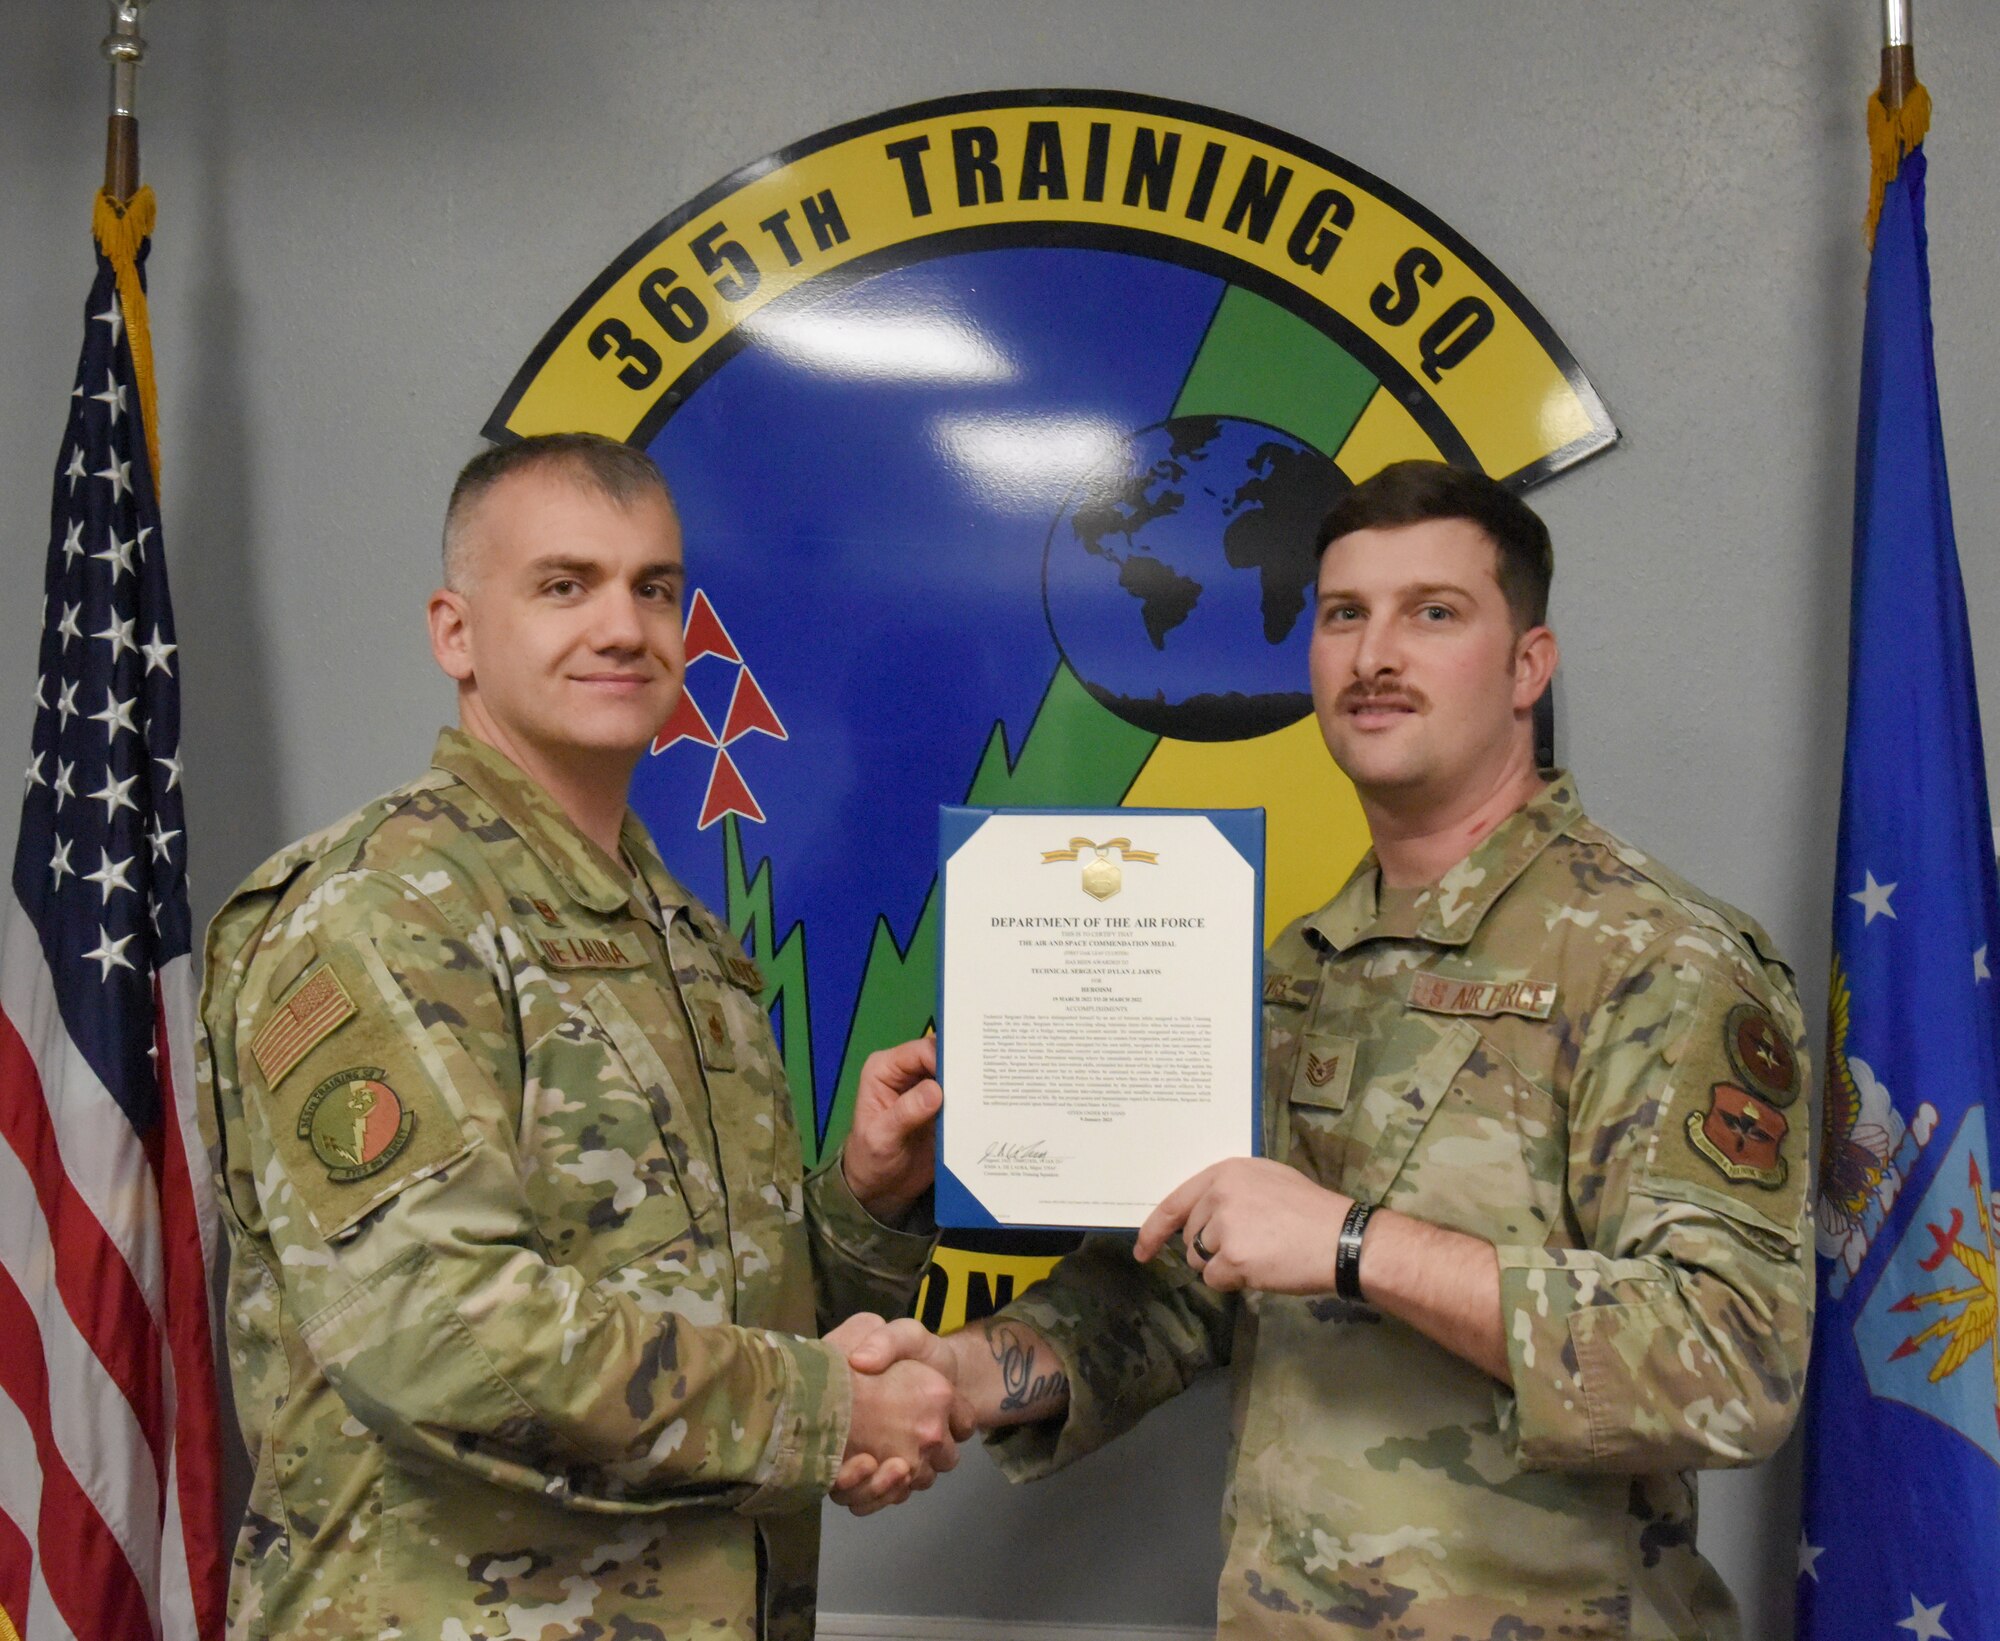 Maj. John De Laura, Commander of the 365th Training Squadron, presents the Air and Space Commendation Medal to Tech. Sgt. Dylan Jarvis, 365th TRS instructor supervisor.